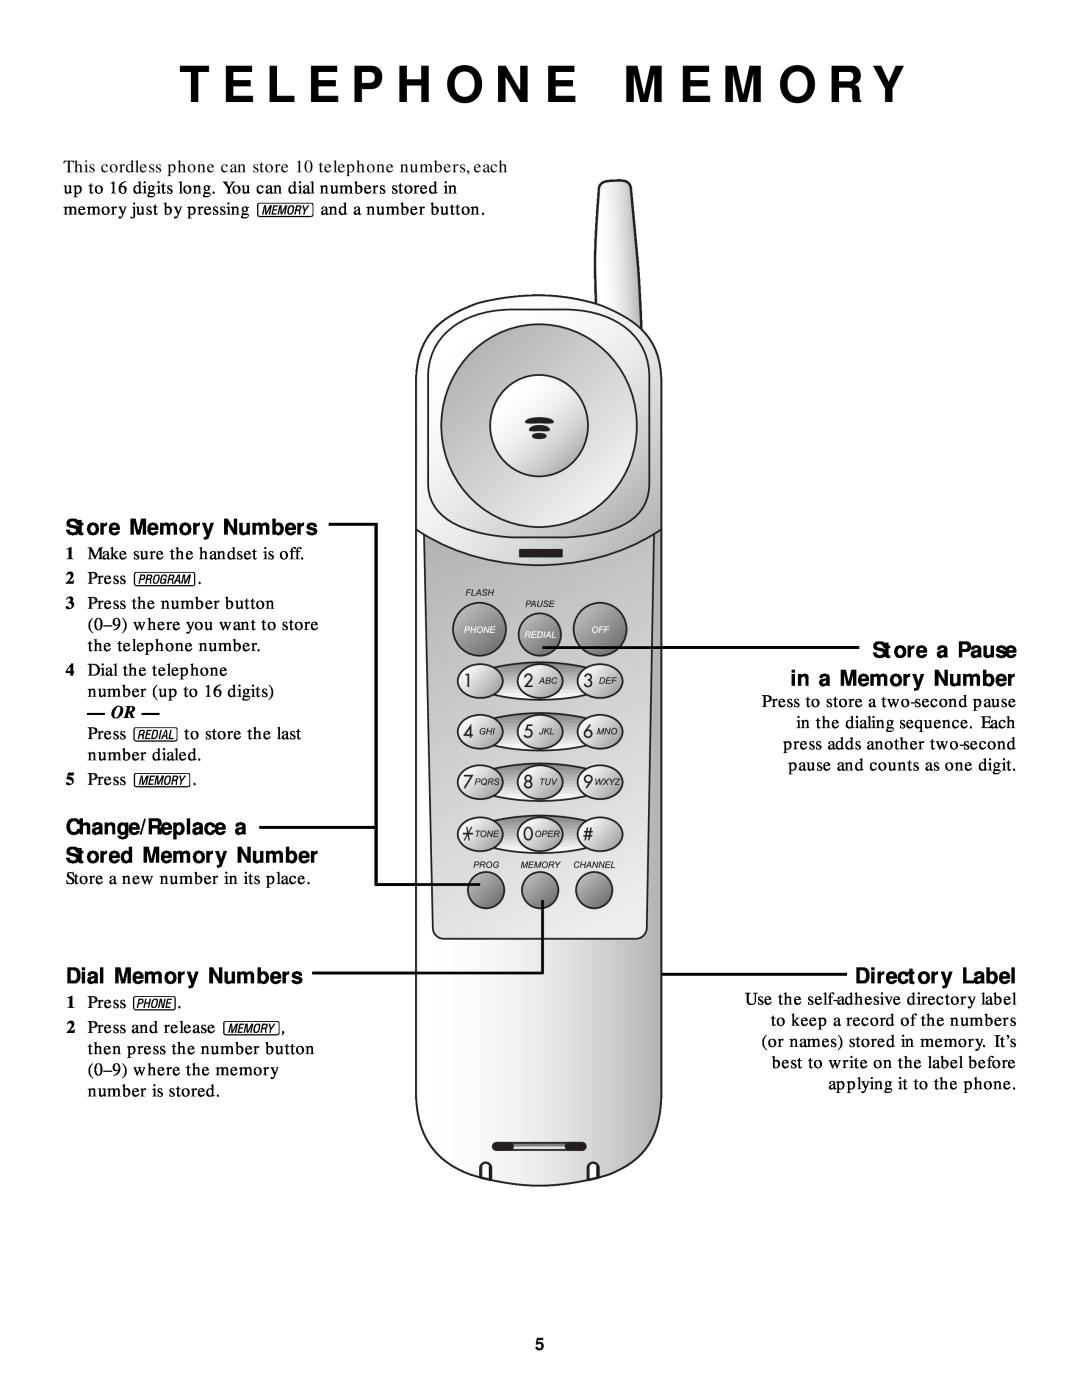 AT&T 9210 T E L E P H O N E M E M O R Y, Store Memory Numbers, Dial Memory Numbers, Store a Pause, in a Memory Number 